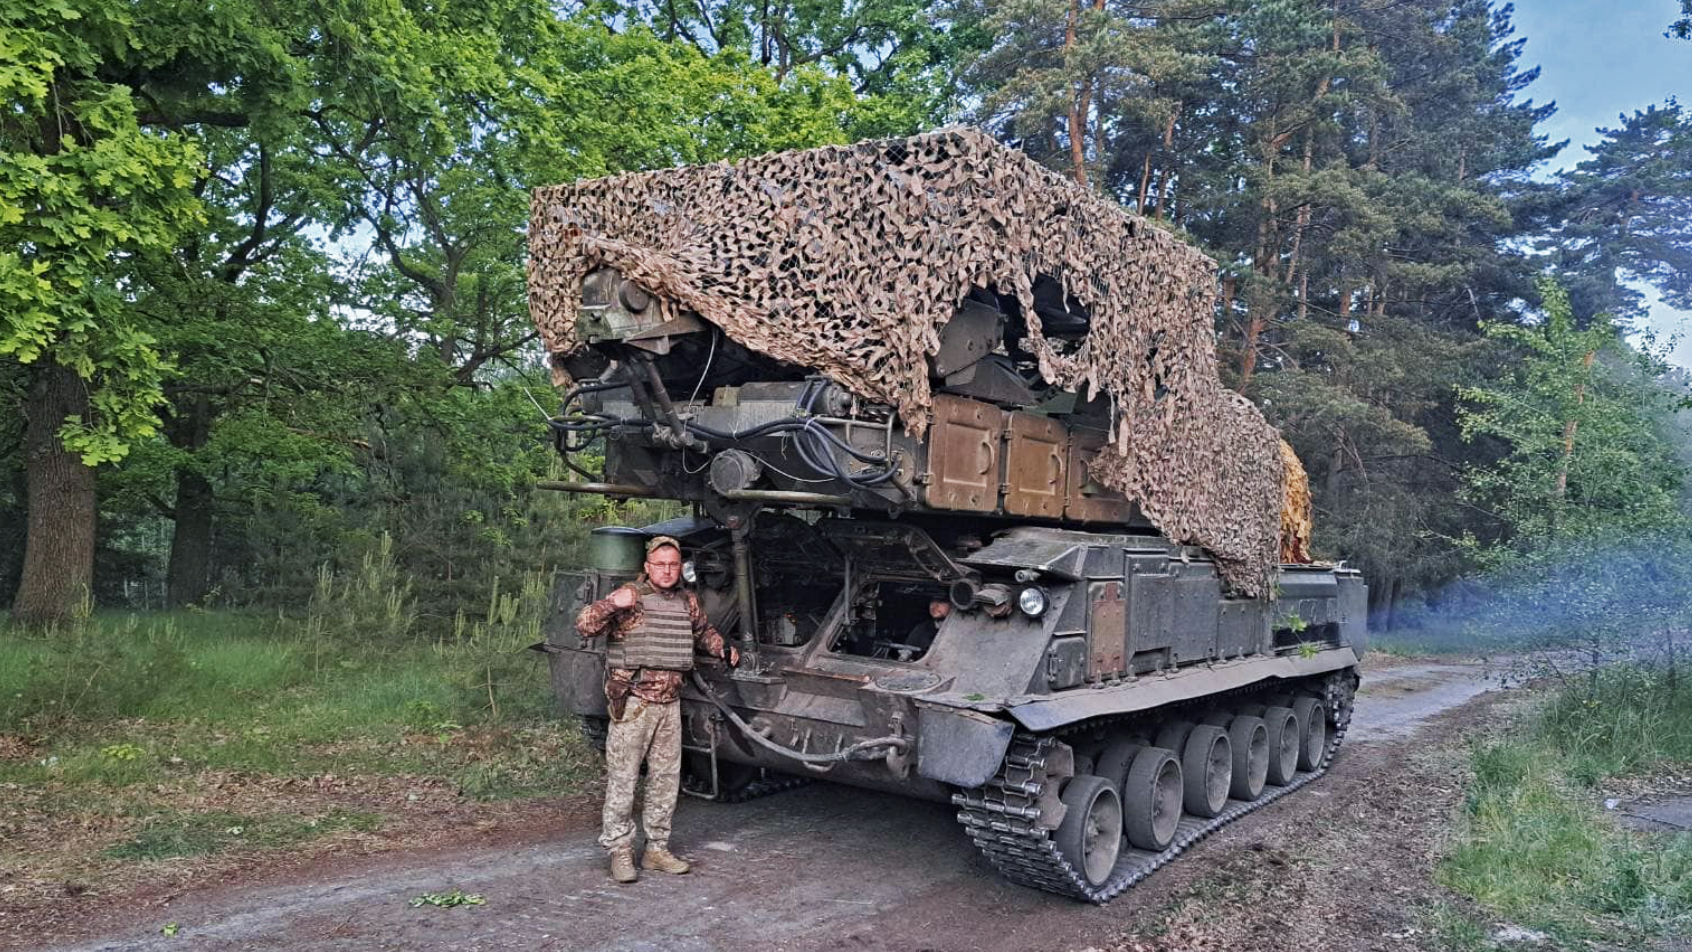 The first official photos have appeared showing a Soviet-era ground-based air defense system upgraded with Western surface-to-air missiles — a so-called ‘FrankenSAM.’ The images, published by Ukraine’s Operational Command East, show a tracked self-propelled Buk-M1 system — known in the West as SA-11 Gadfly — which is said to have been adapted to fire the RIM-7 Sea Sparrow, a missile that previously provided point defense for numerous NATO and allied warships.